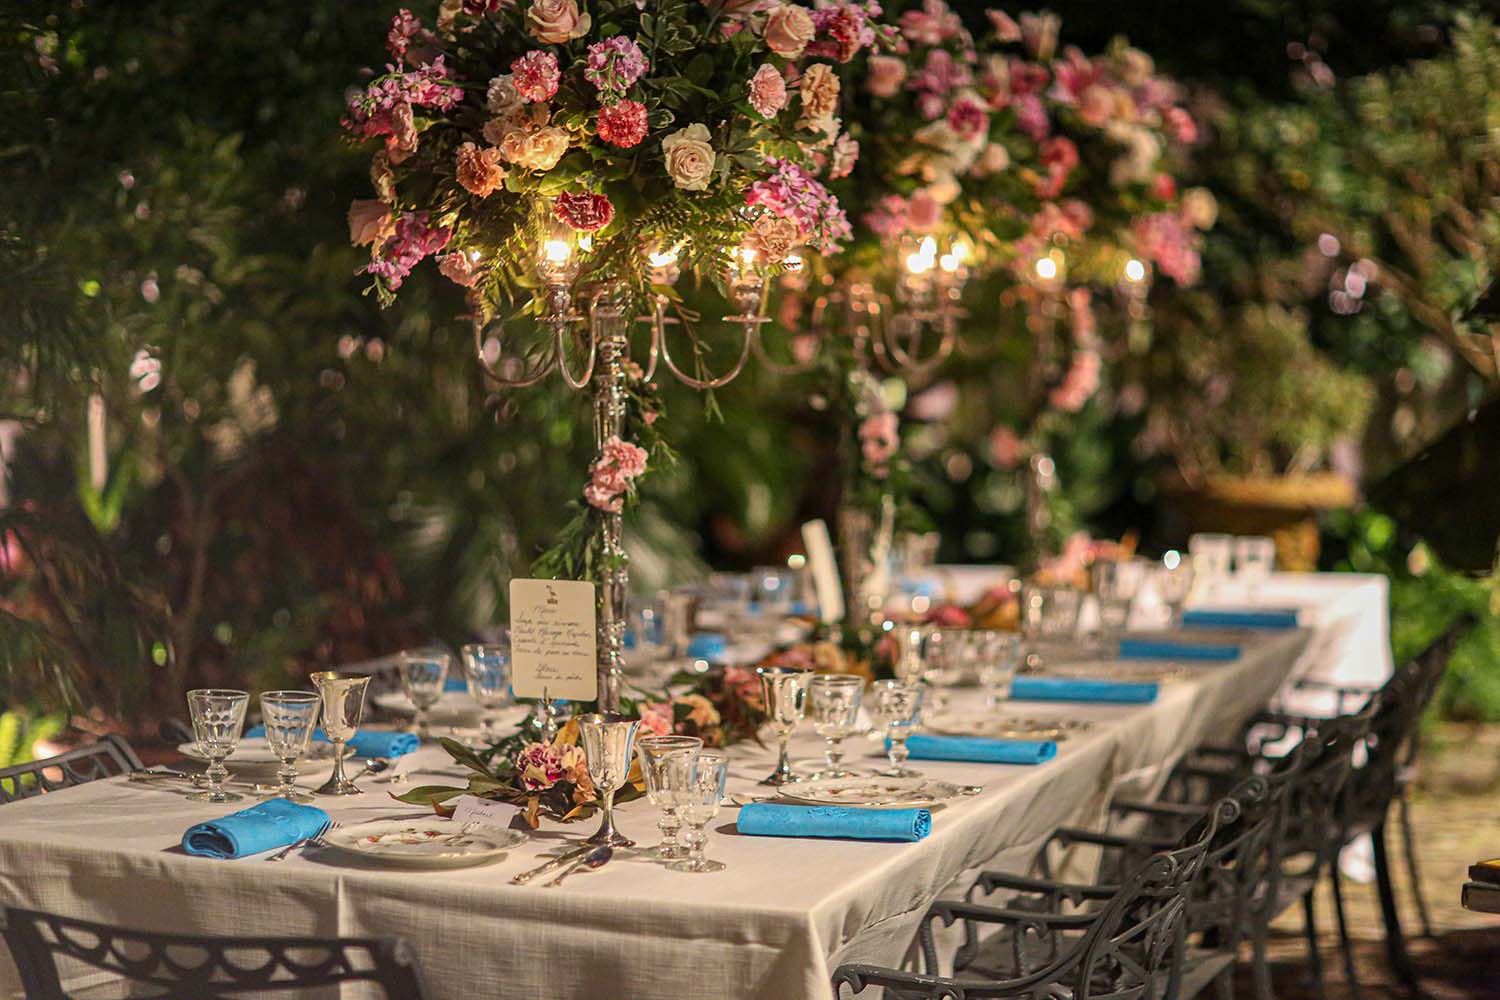 A table is set with roses, carnations, magnolias, and teal napkins.